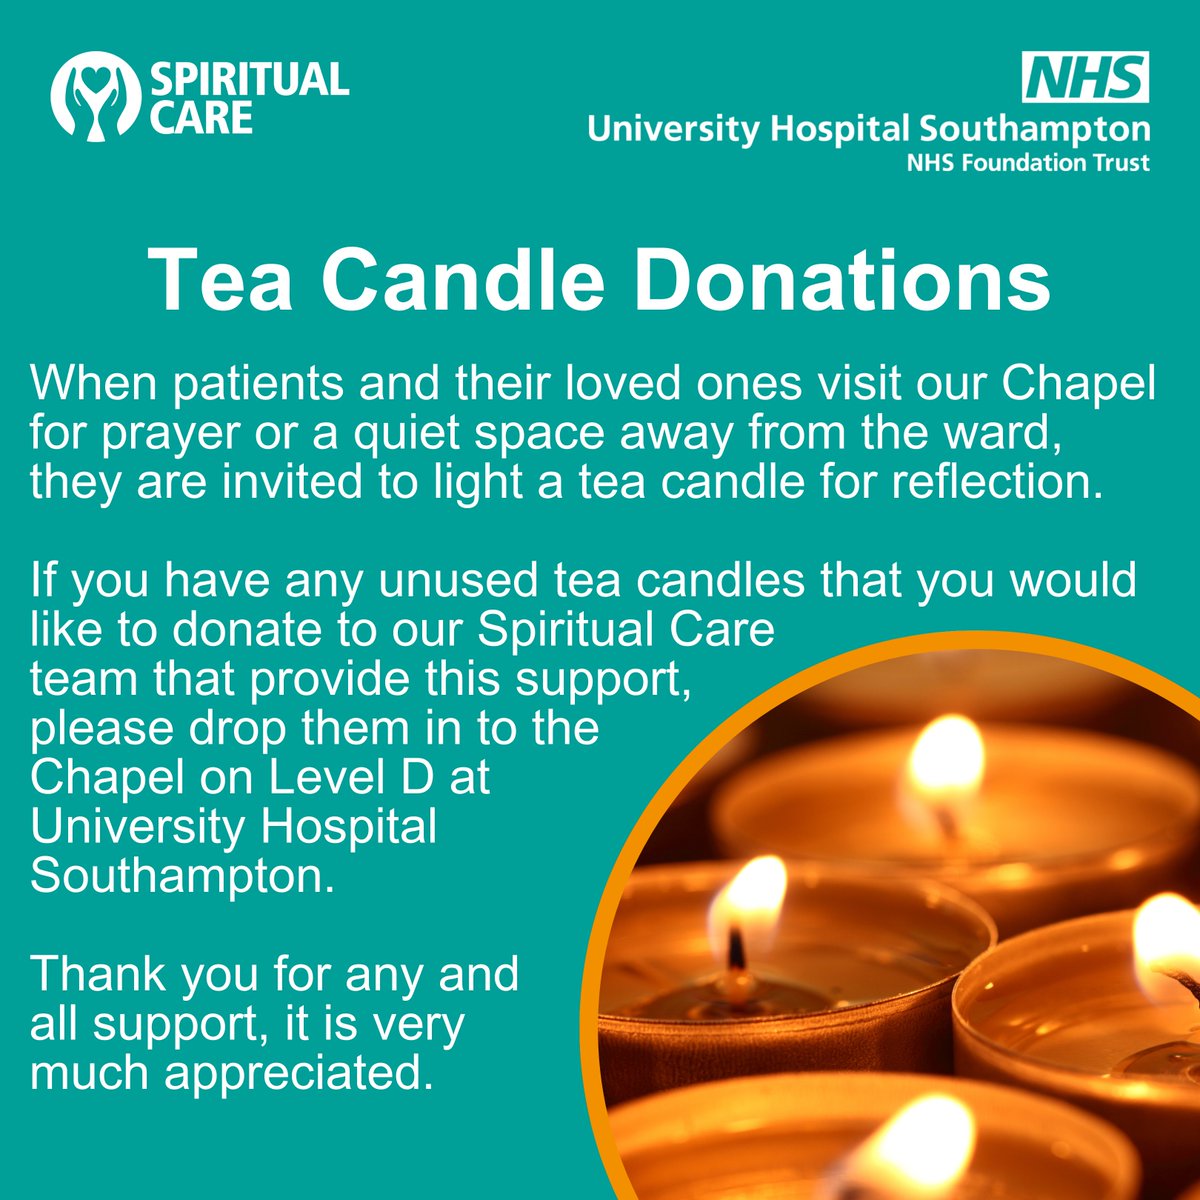 At @UHSFT, patients and loved ones who visit the Chapel are invited to light a tea candle for reflection. If you have unused tea candles at home that you'd like to donate to @ChaplainsUHS, please drop them to the UHS Chapel on Level D. Thank you for any and all support 💙